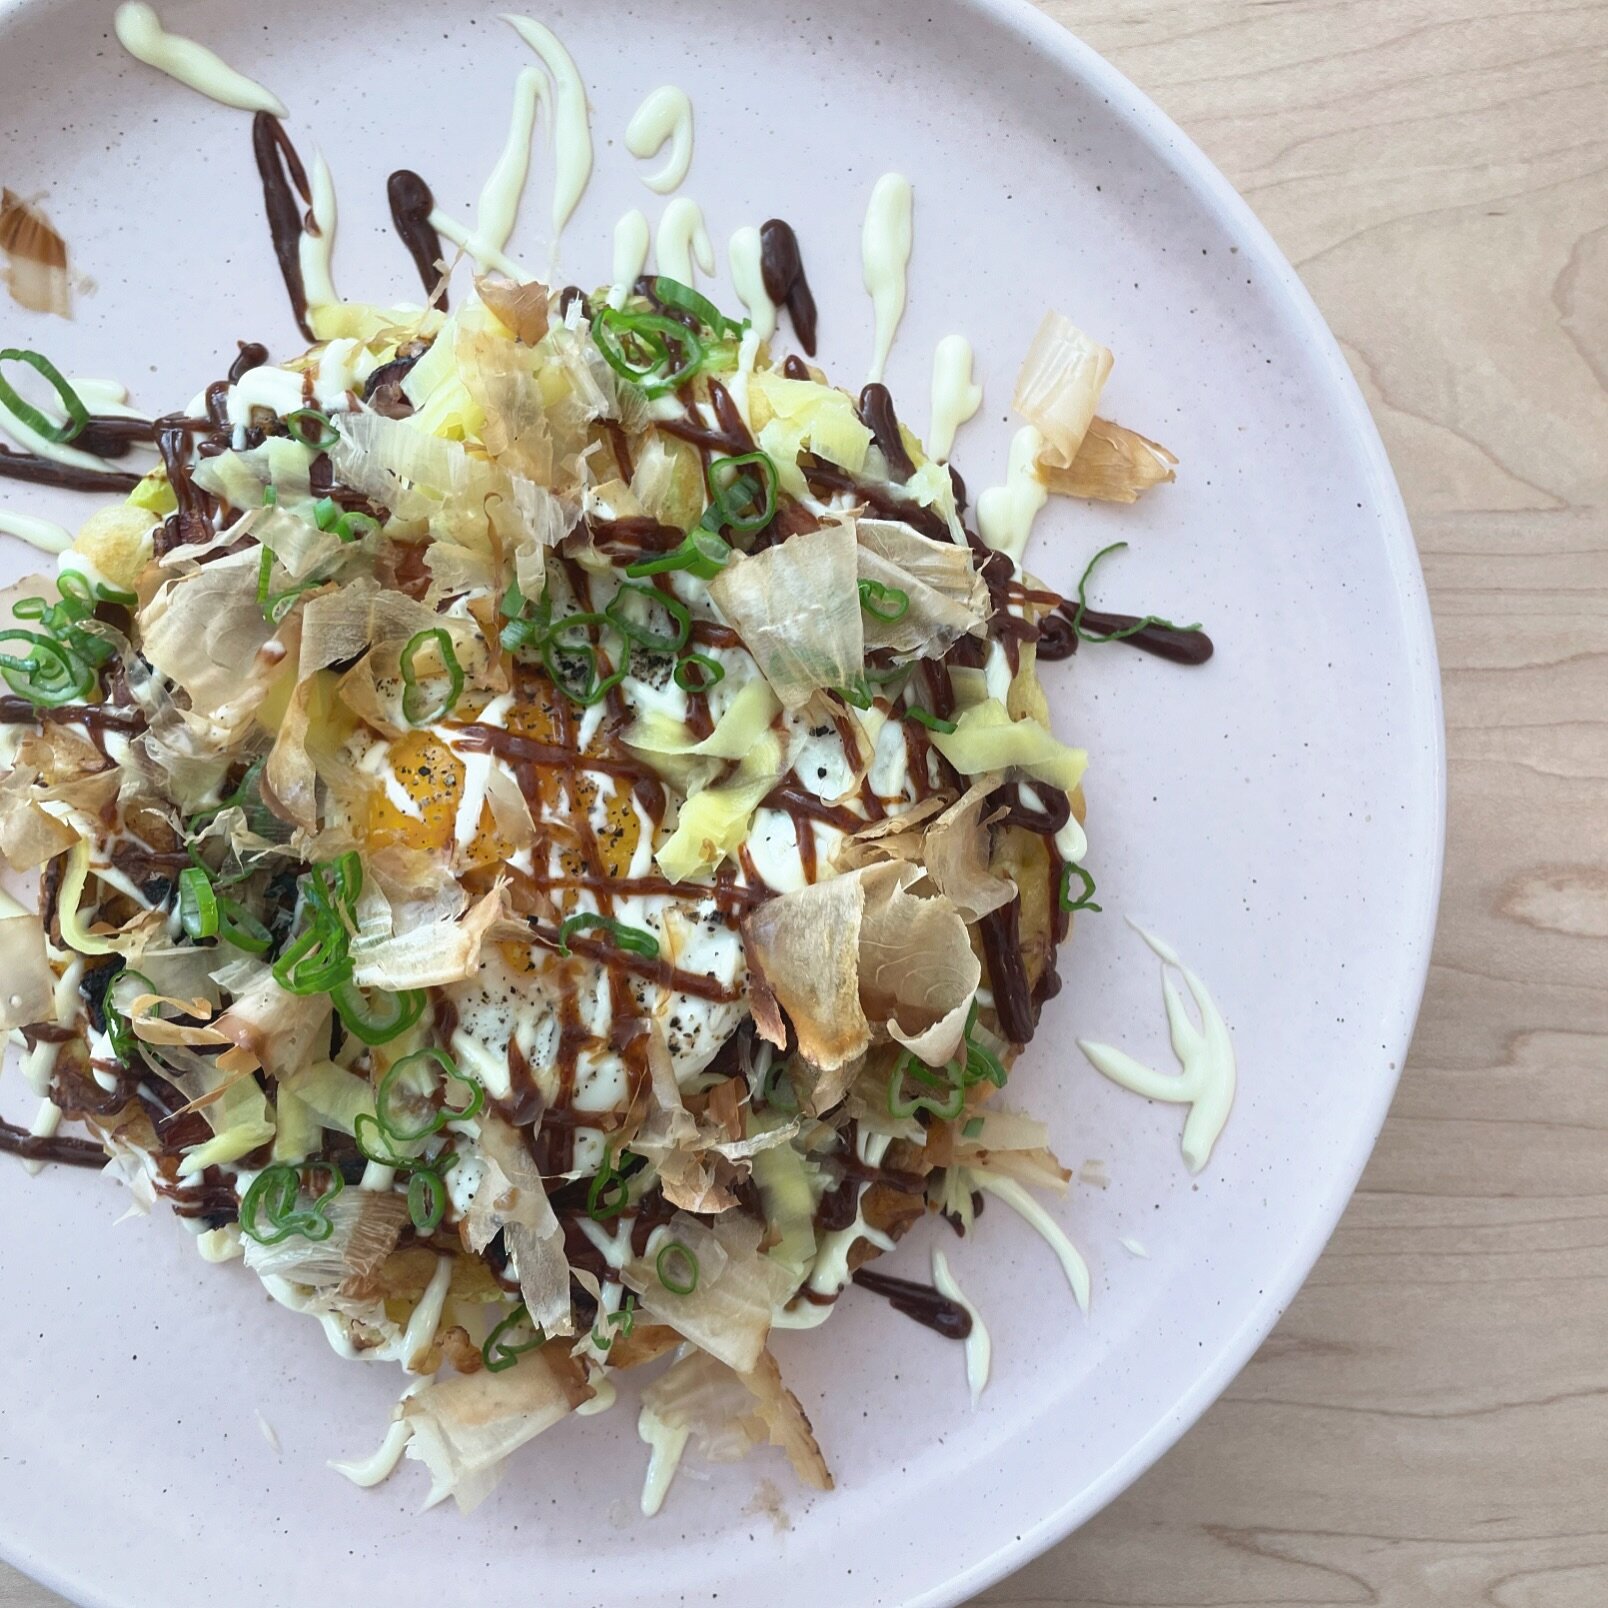 🥬 OKONOMIYAKI 🥬 
Our take on the classic Japanese pancake - light and fluffy, with napa cabbage, @broadarrowfarm pork belly, sunny side up egg, pickled ginger, bonito flakes, house-made &ldquo;kewpie&rdquo; mayo, and pickled plum hoisin. Limited qu